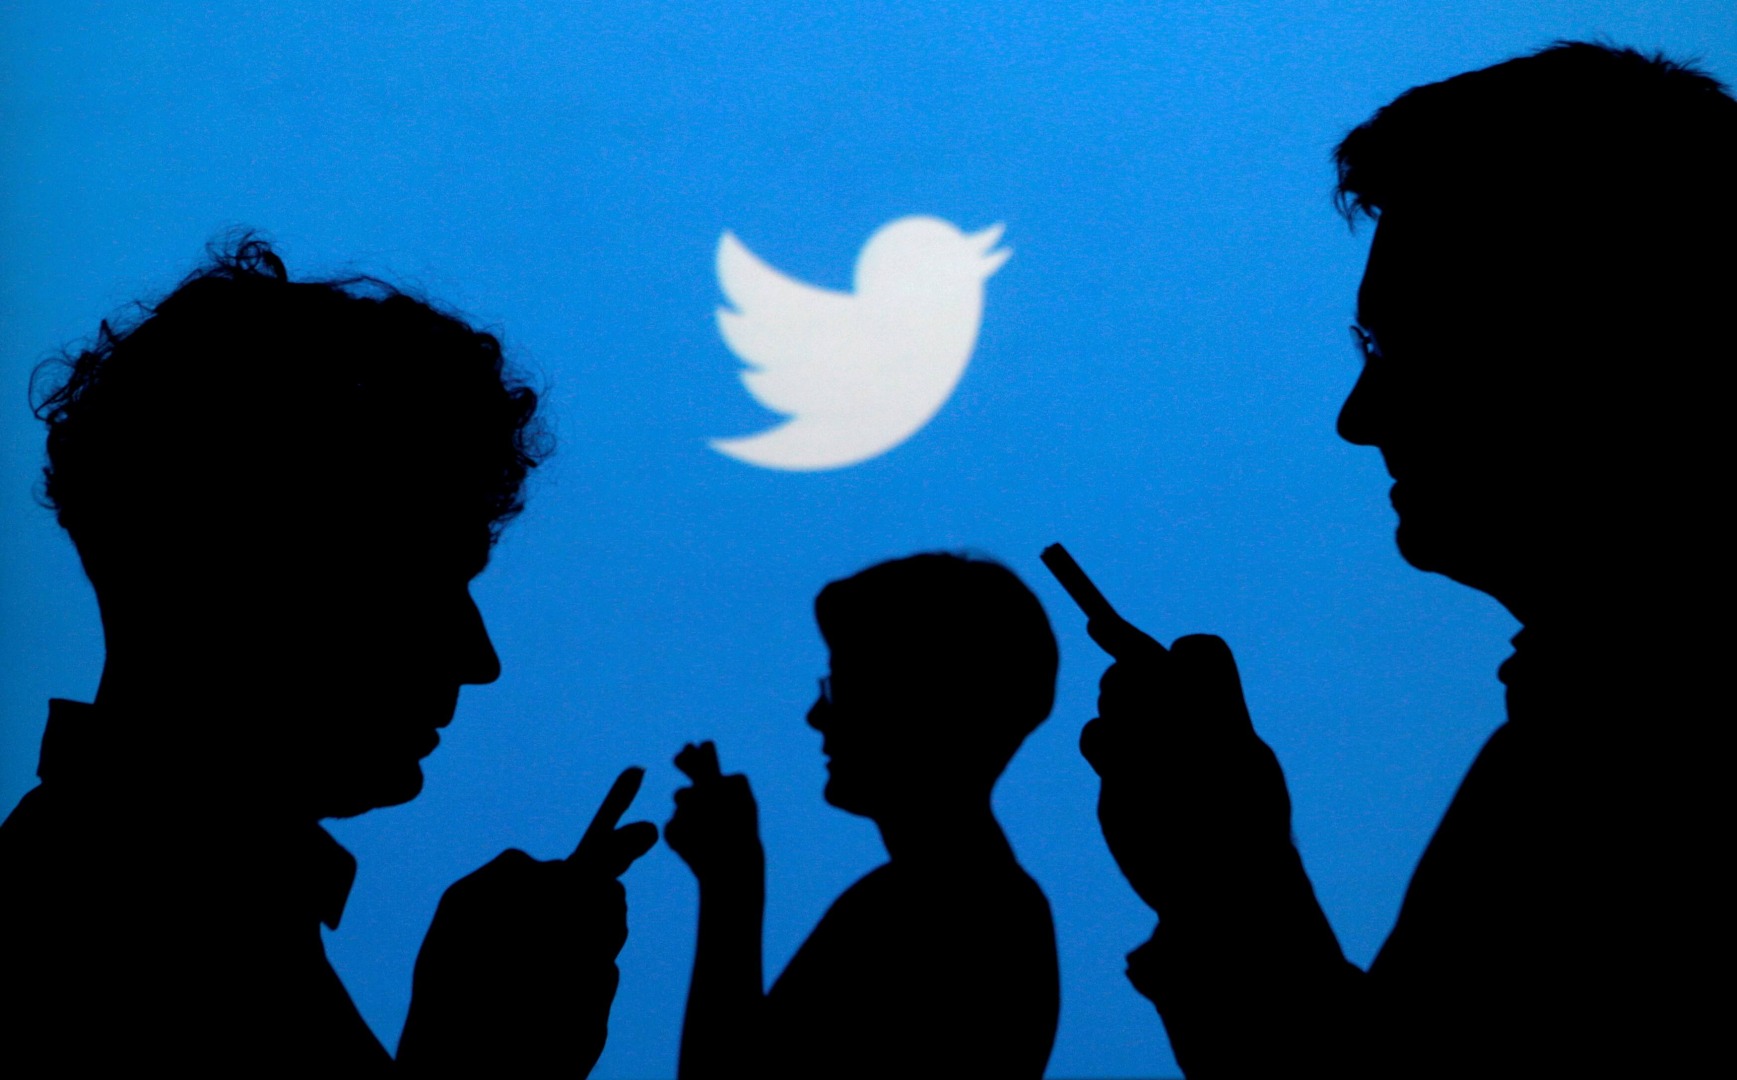 Twitter is Taking Another Step Toward Moderating Hate Speech